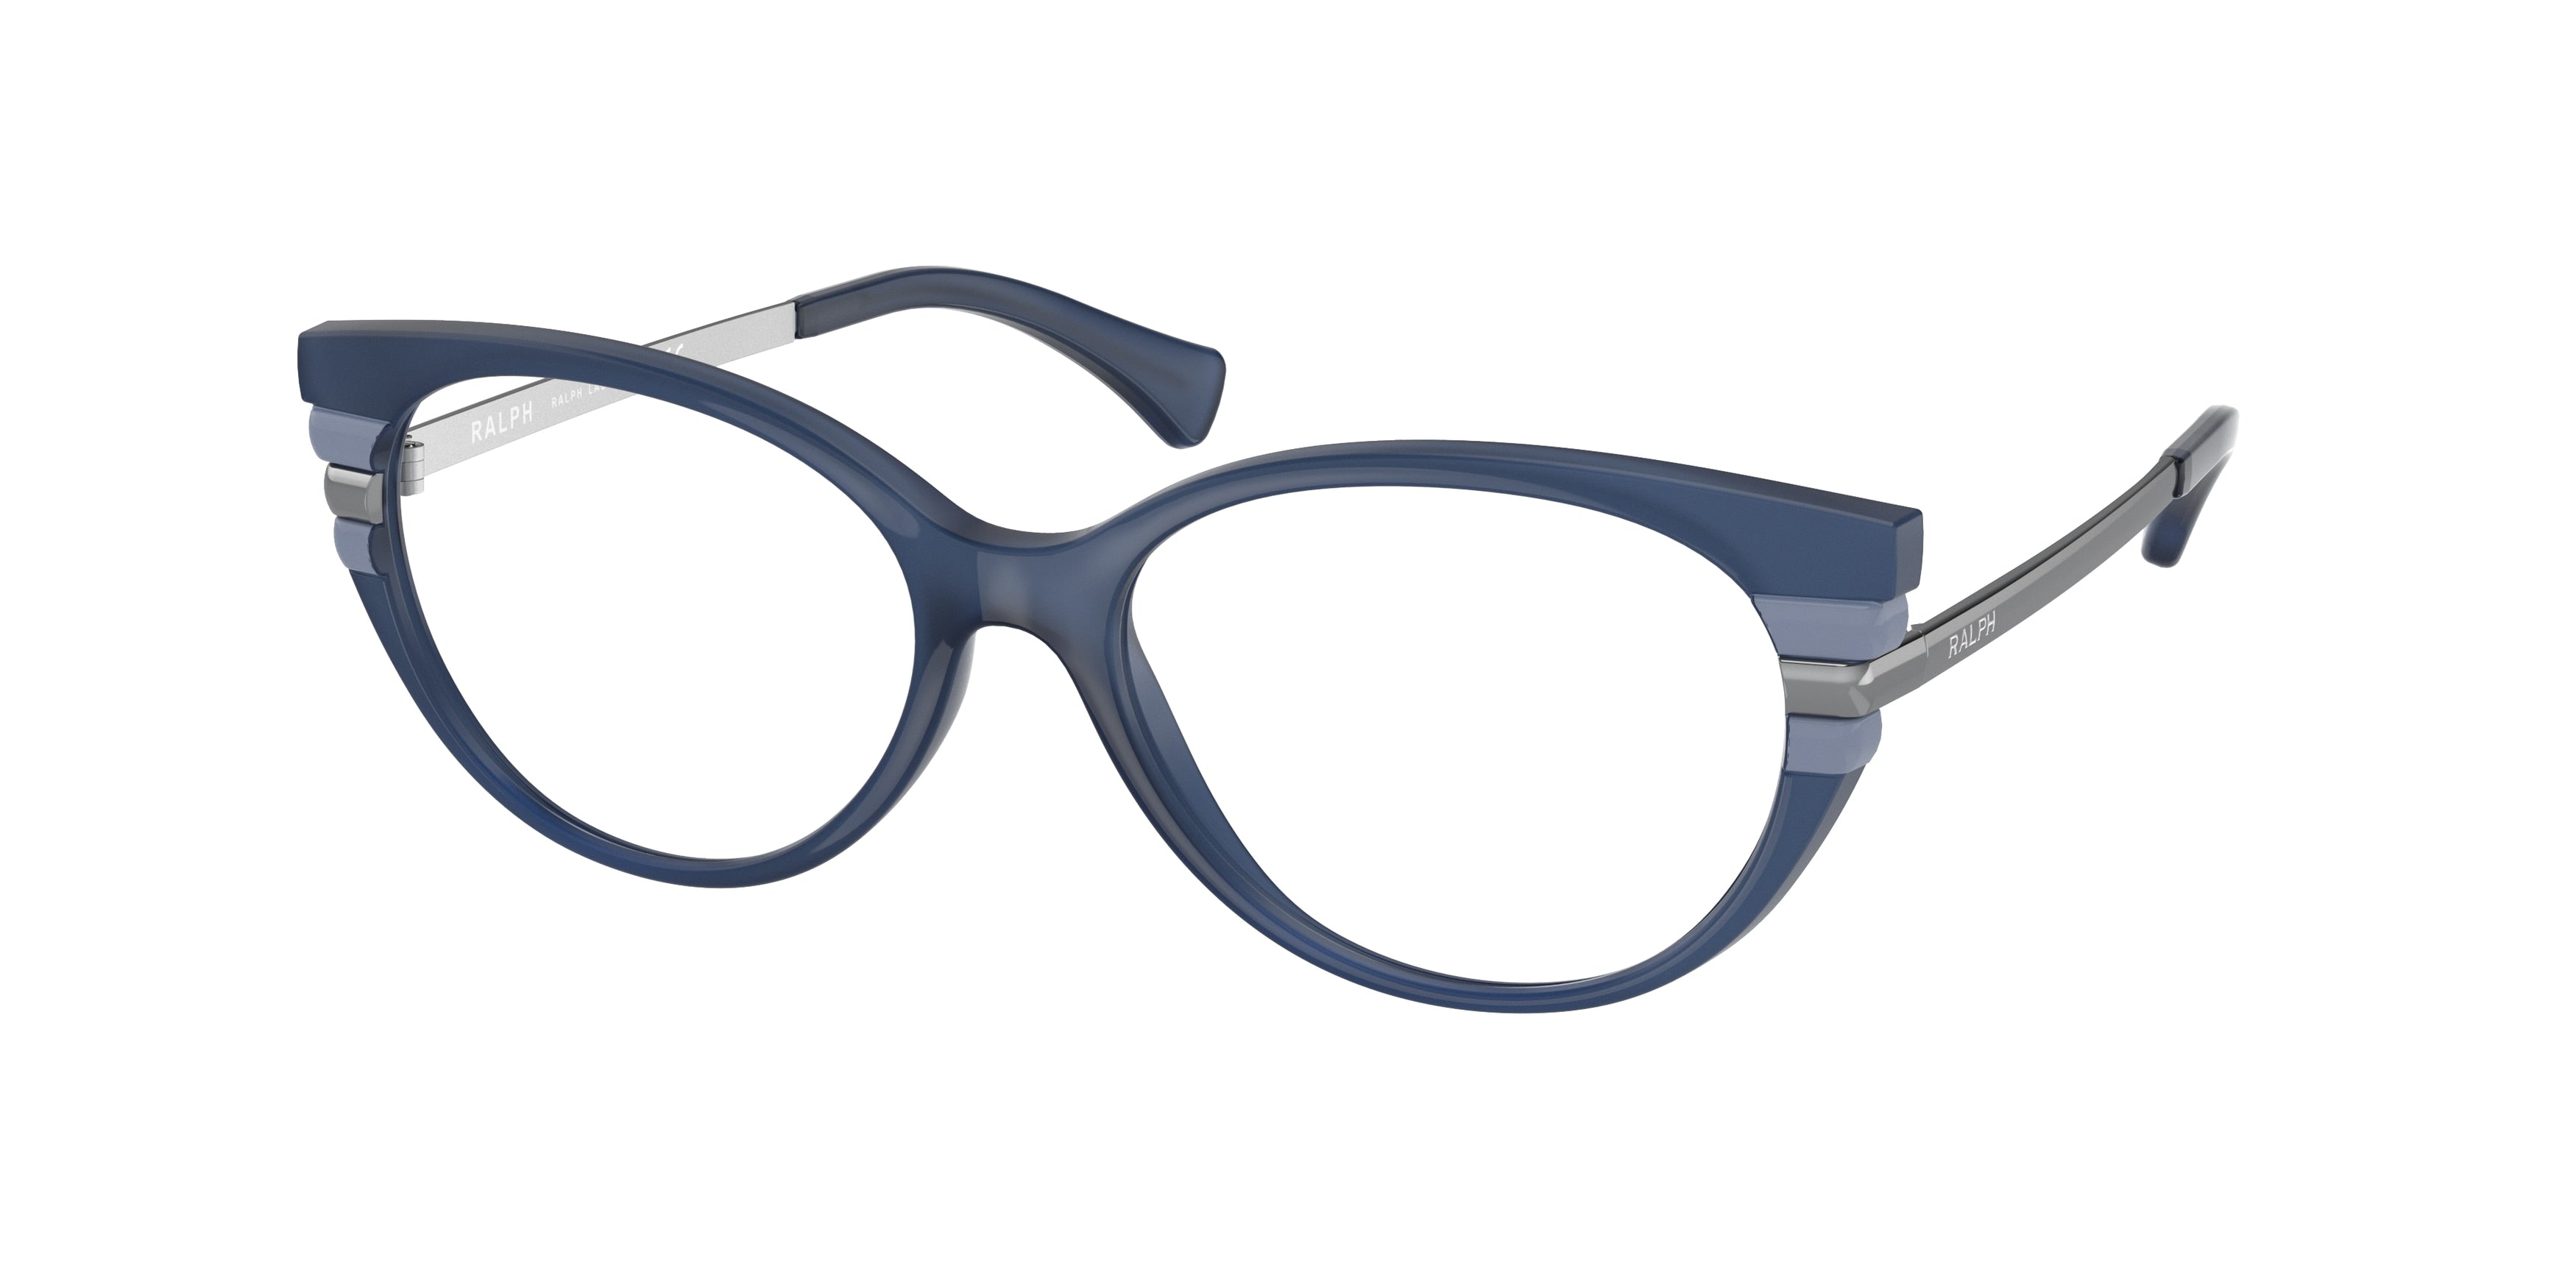 Ralph RA7127 Butterfly Eyeglasses  5948-Opal Blue With Blue Details 54-140-16 - Color Map Blue